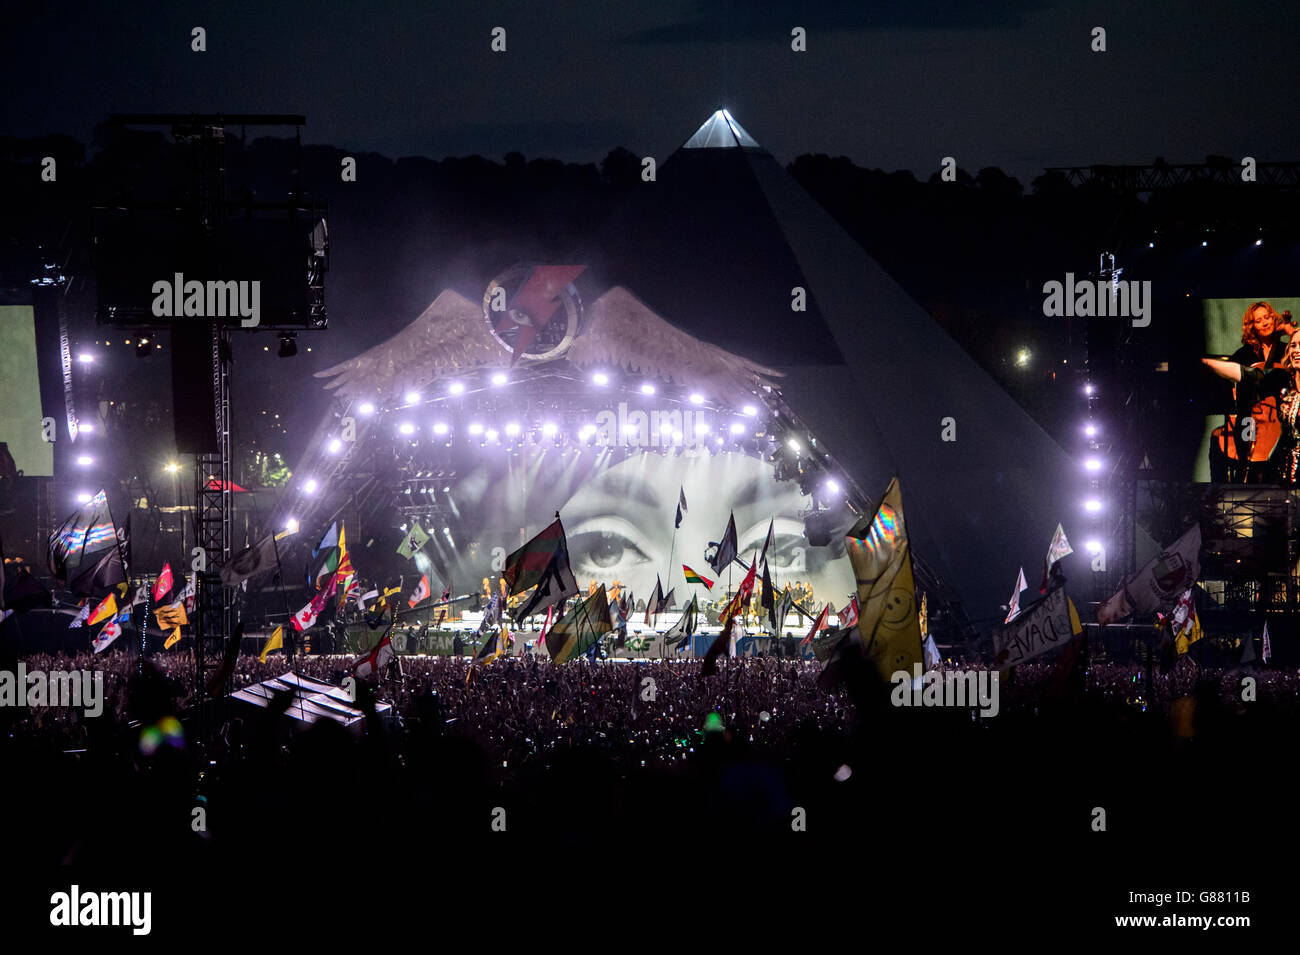 Adele performs at the Glastonbury music festival at Worthy Farm, in Somerset, England Stock Photo